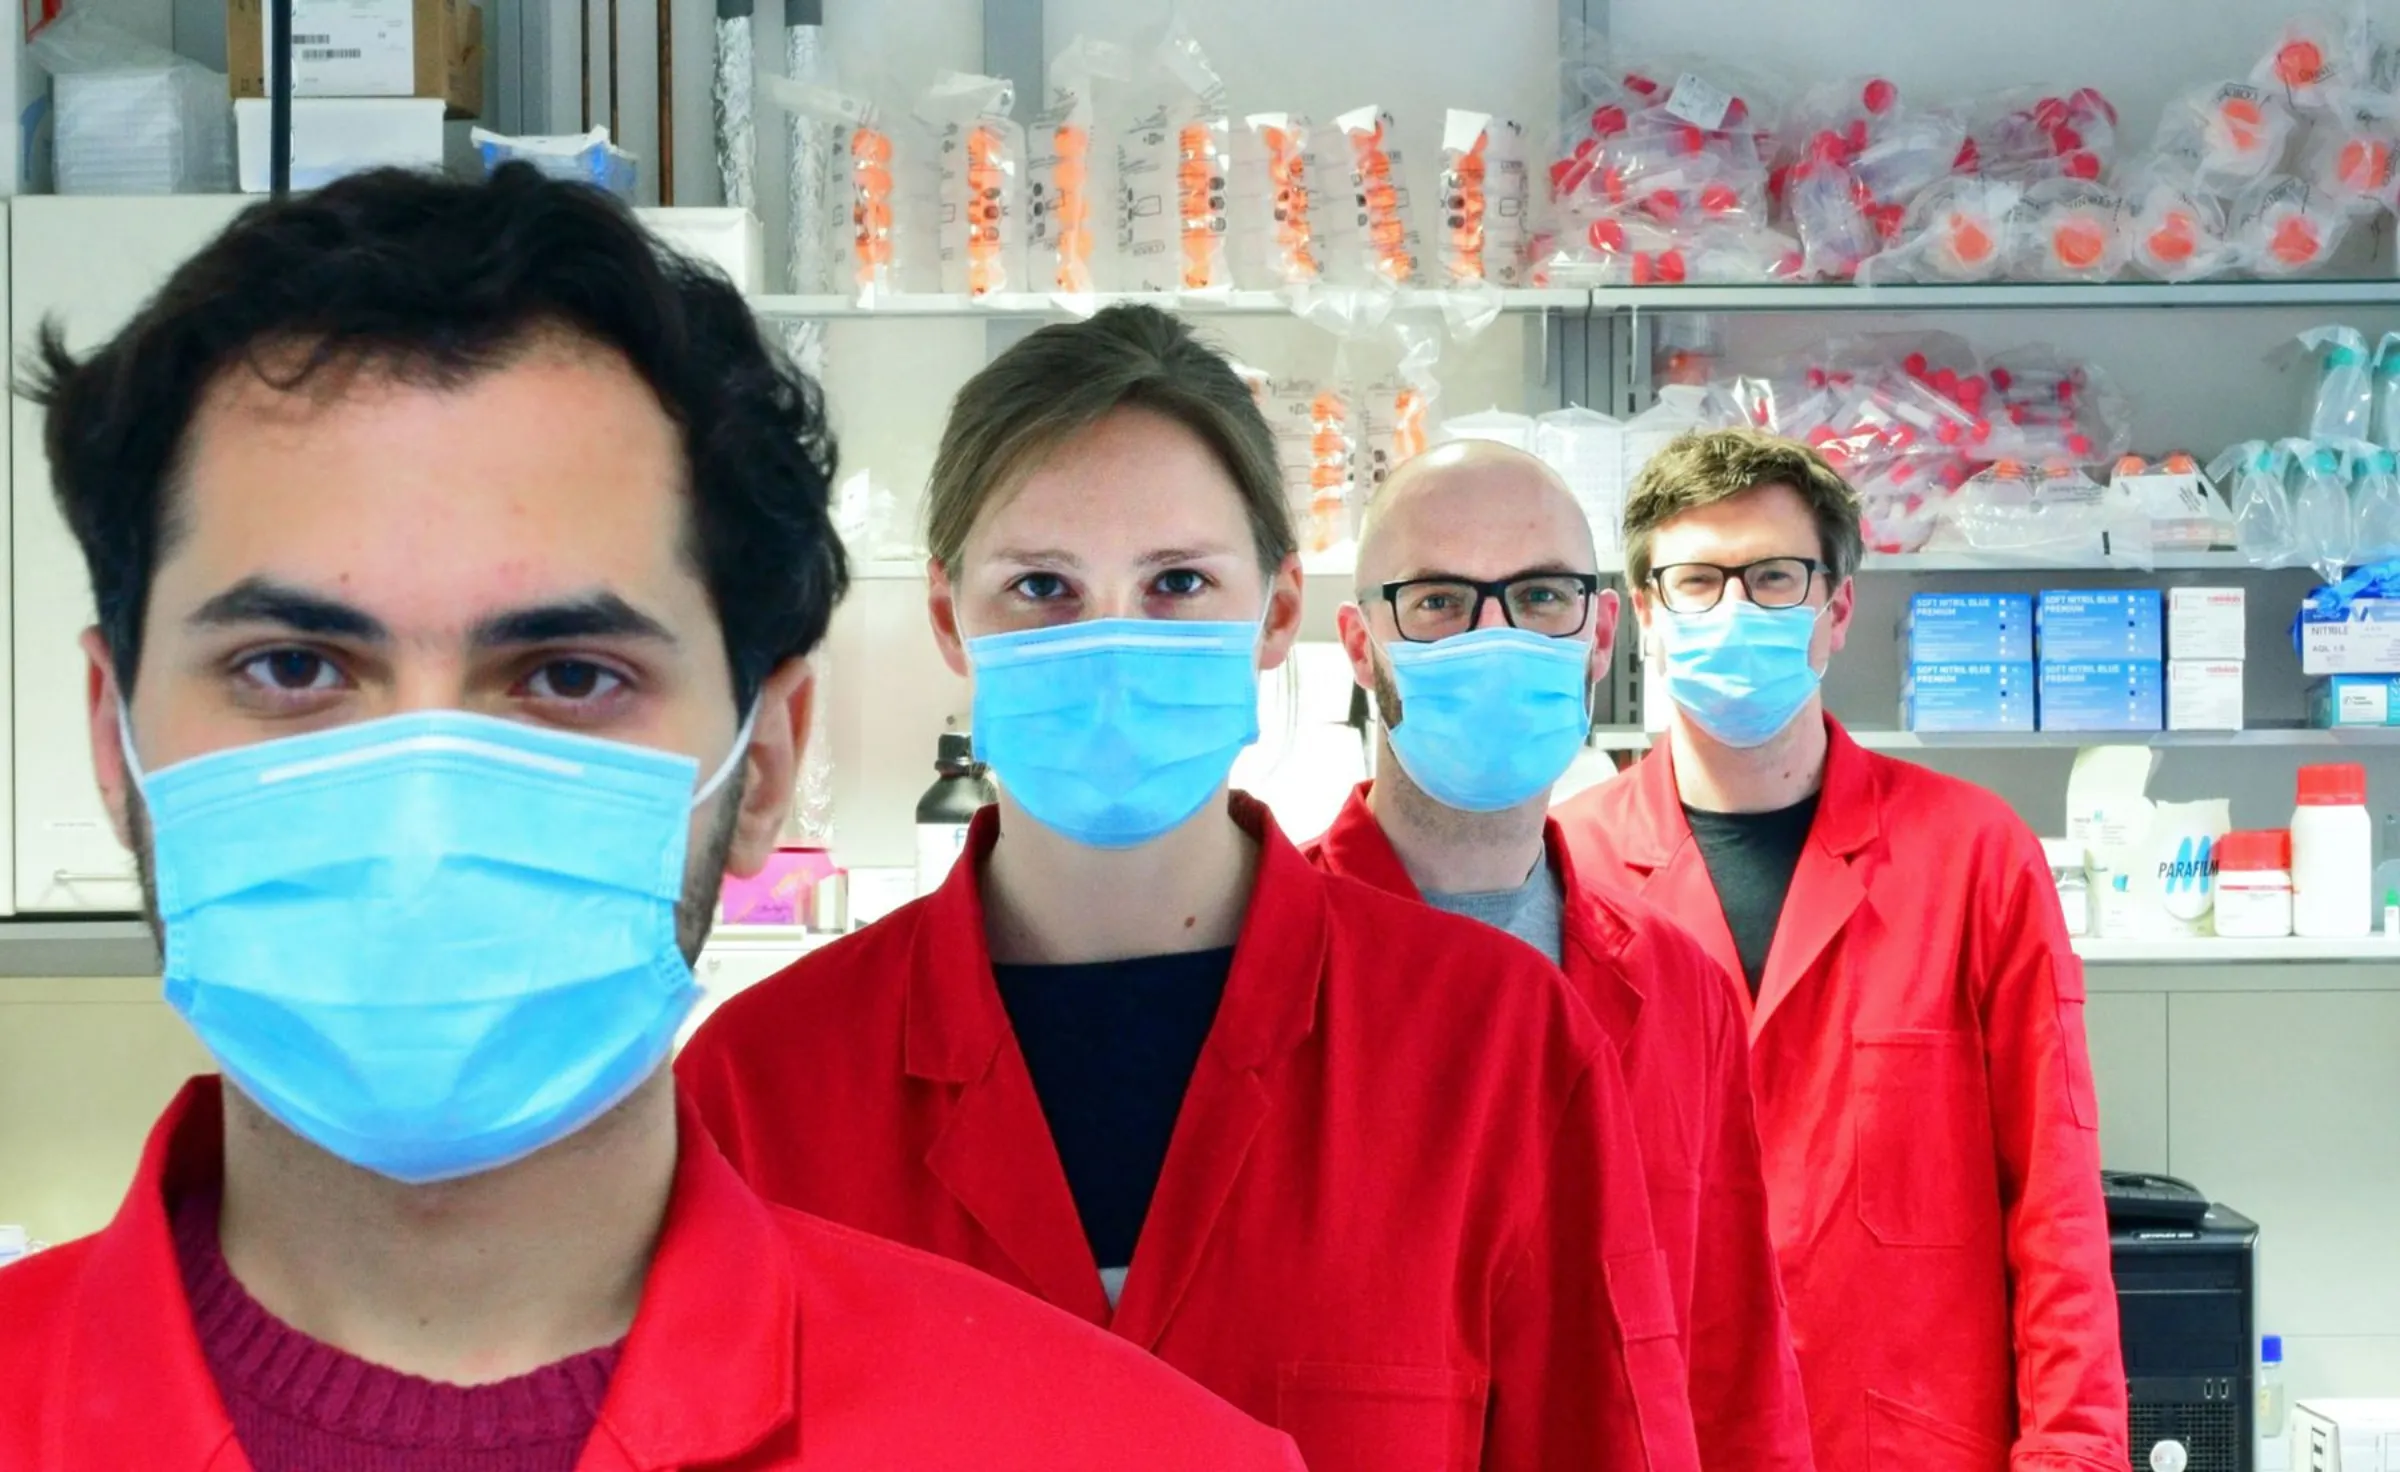 Scientists in red lad coats and protective masks stand in line in a science lab